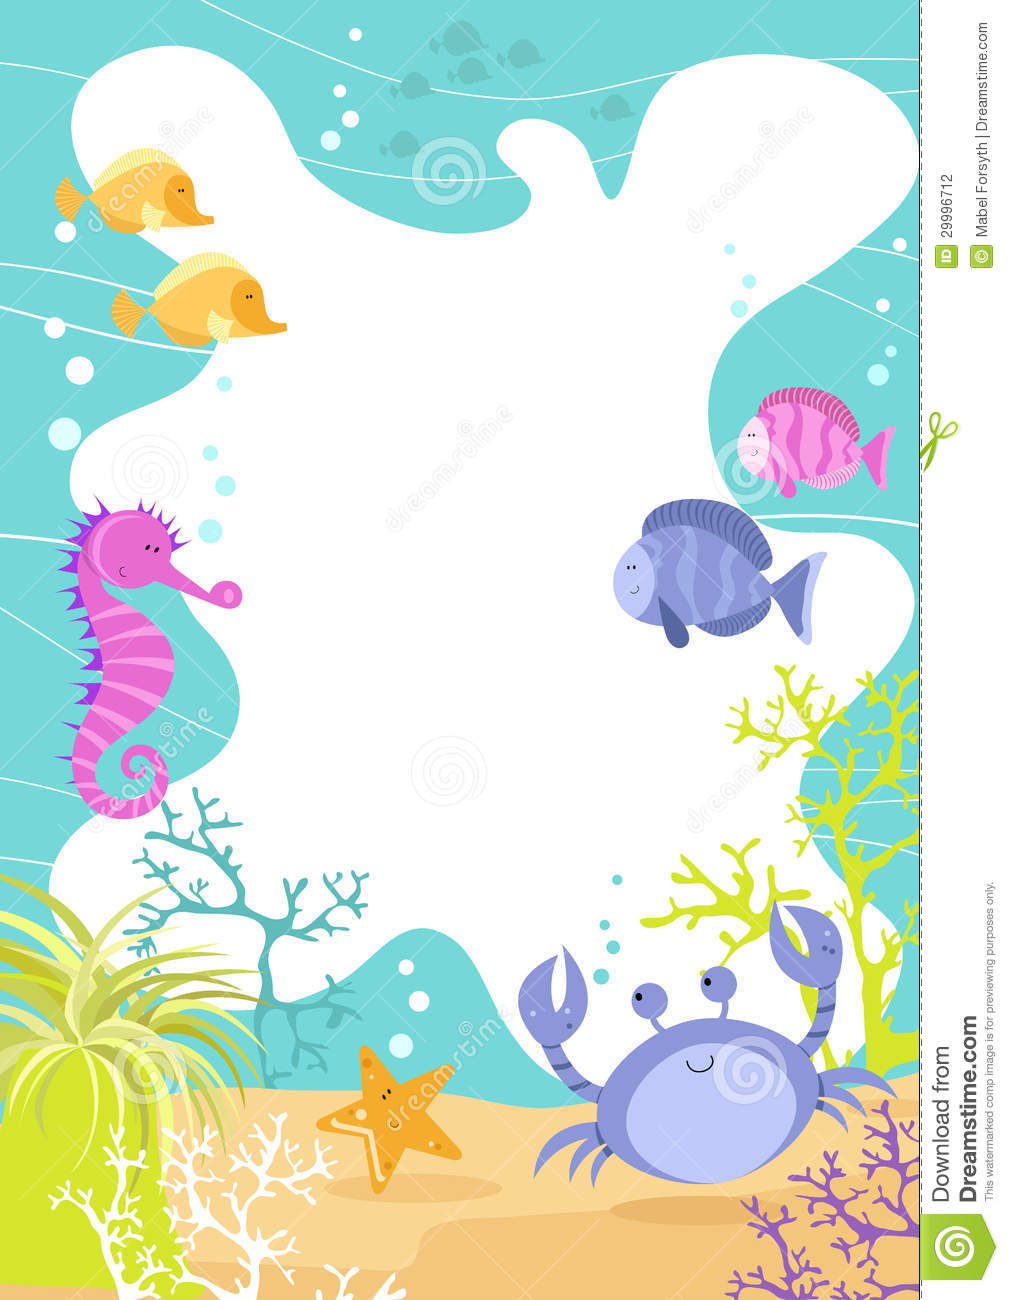 Border With Sea Creatures Waves Crab Seahorse Tropical Fish And